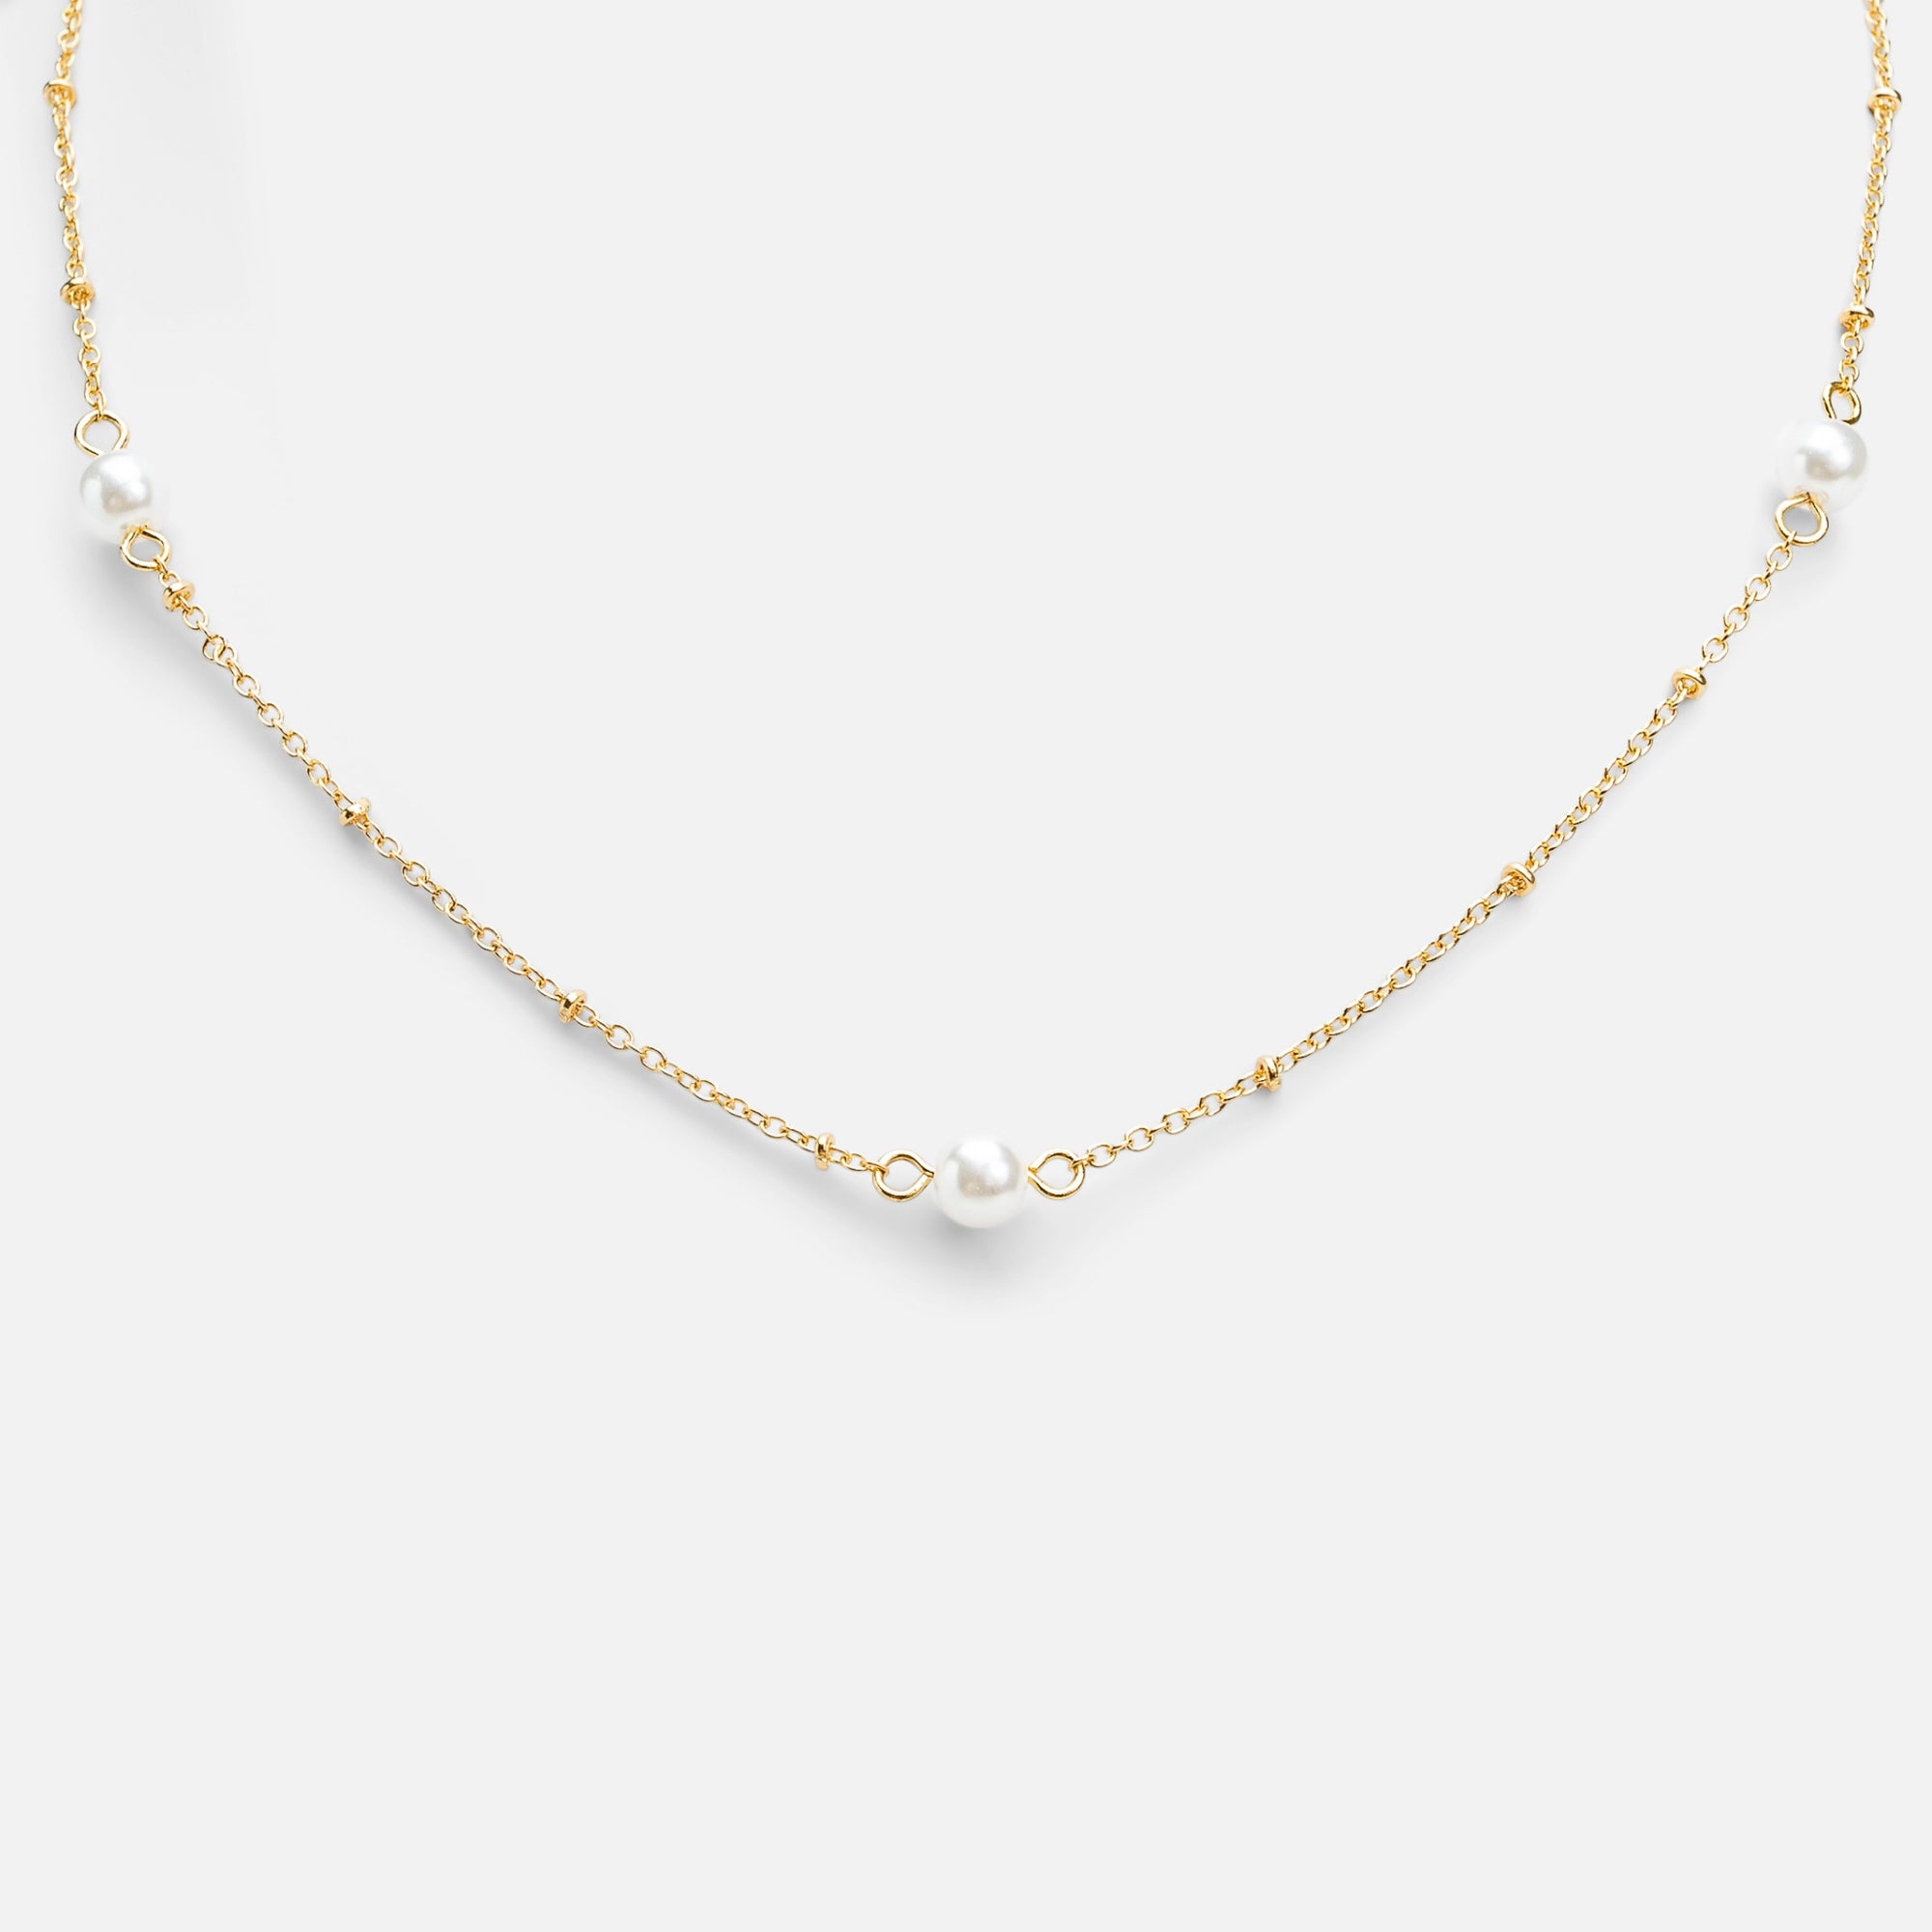 Golden necklace with pearl inserts 